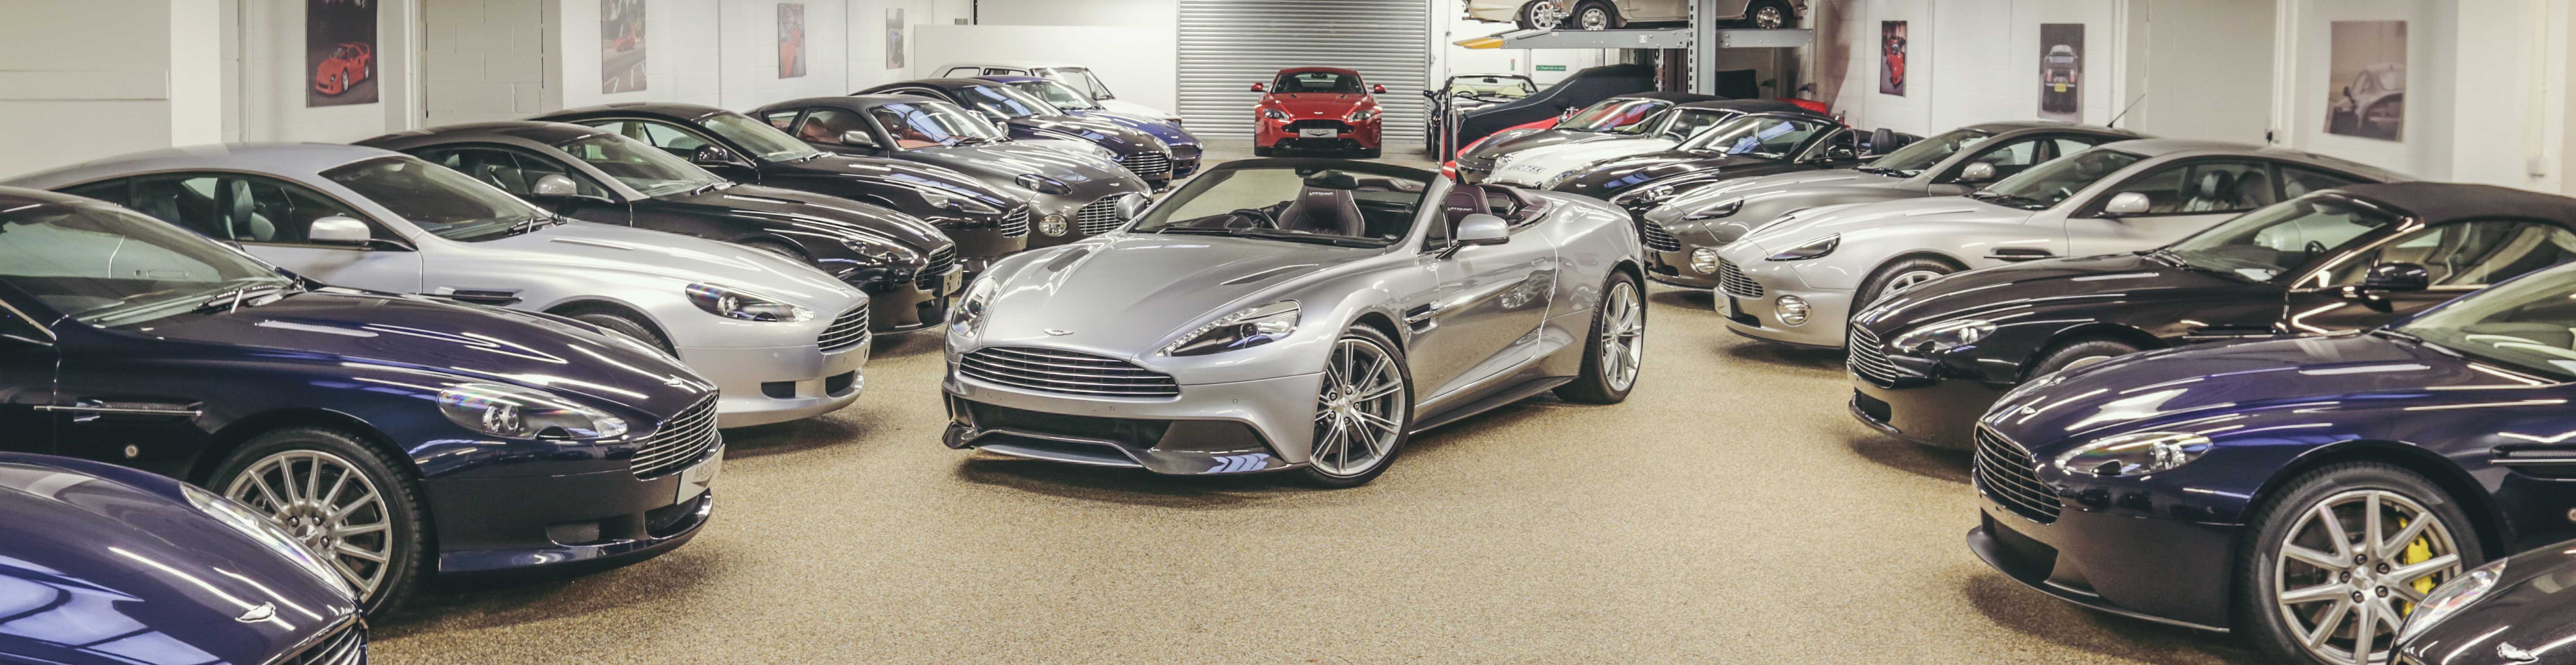 Images of Aston Martin cars in a Showroom